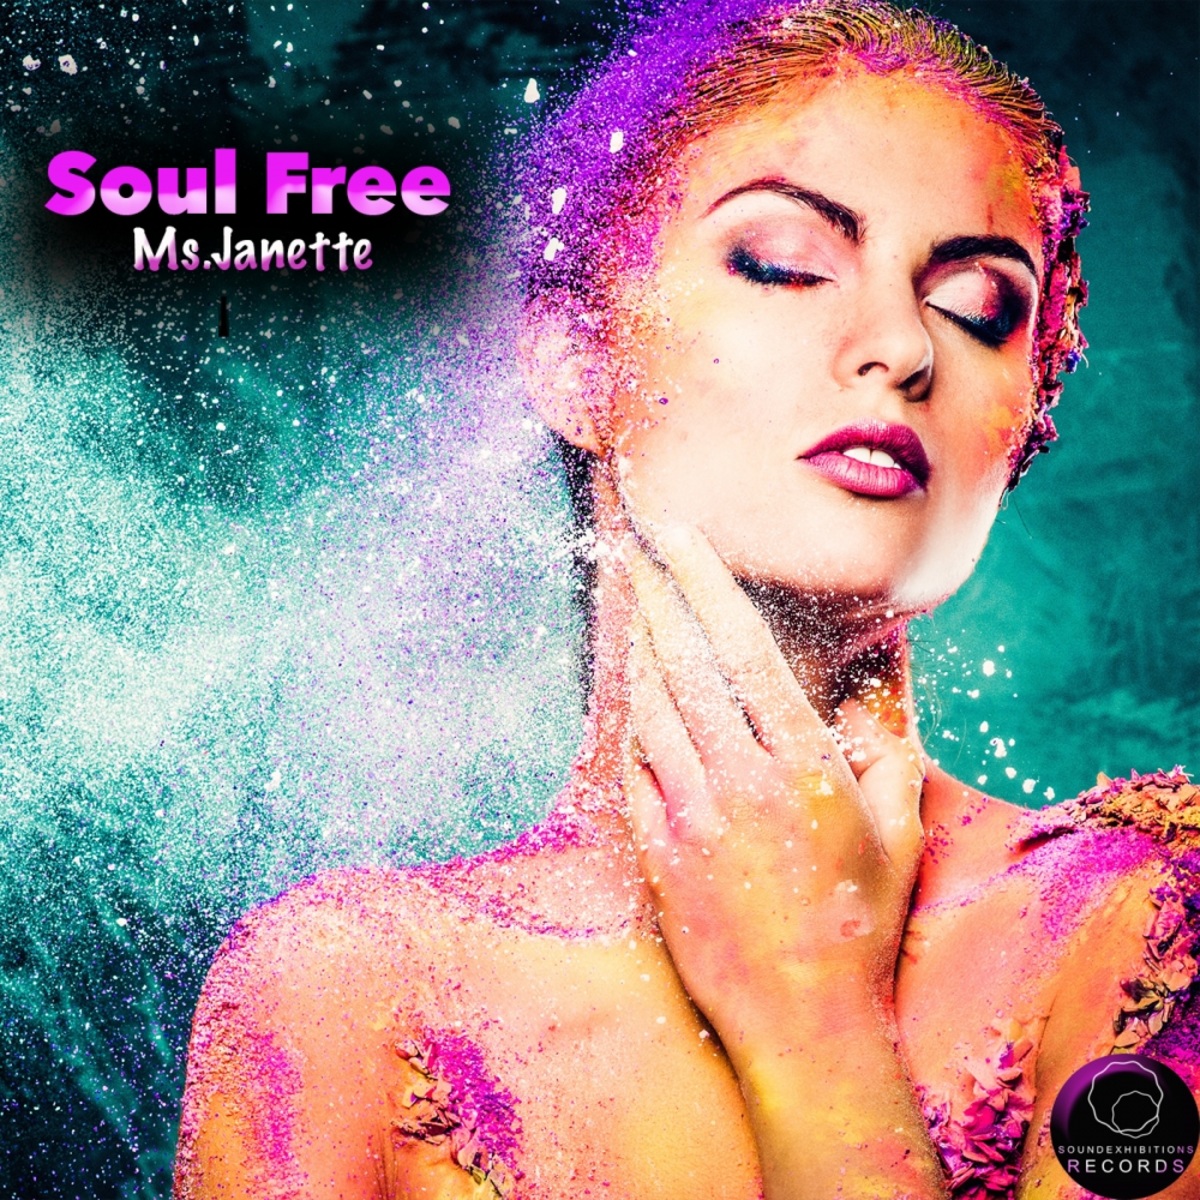 Ms. Janette - SoulFree / Sound-Exhibitions-Records